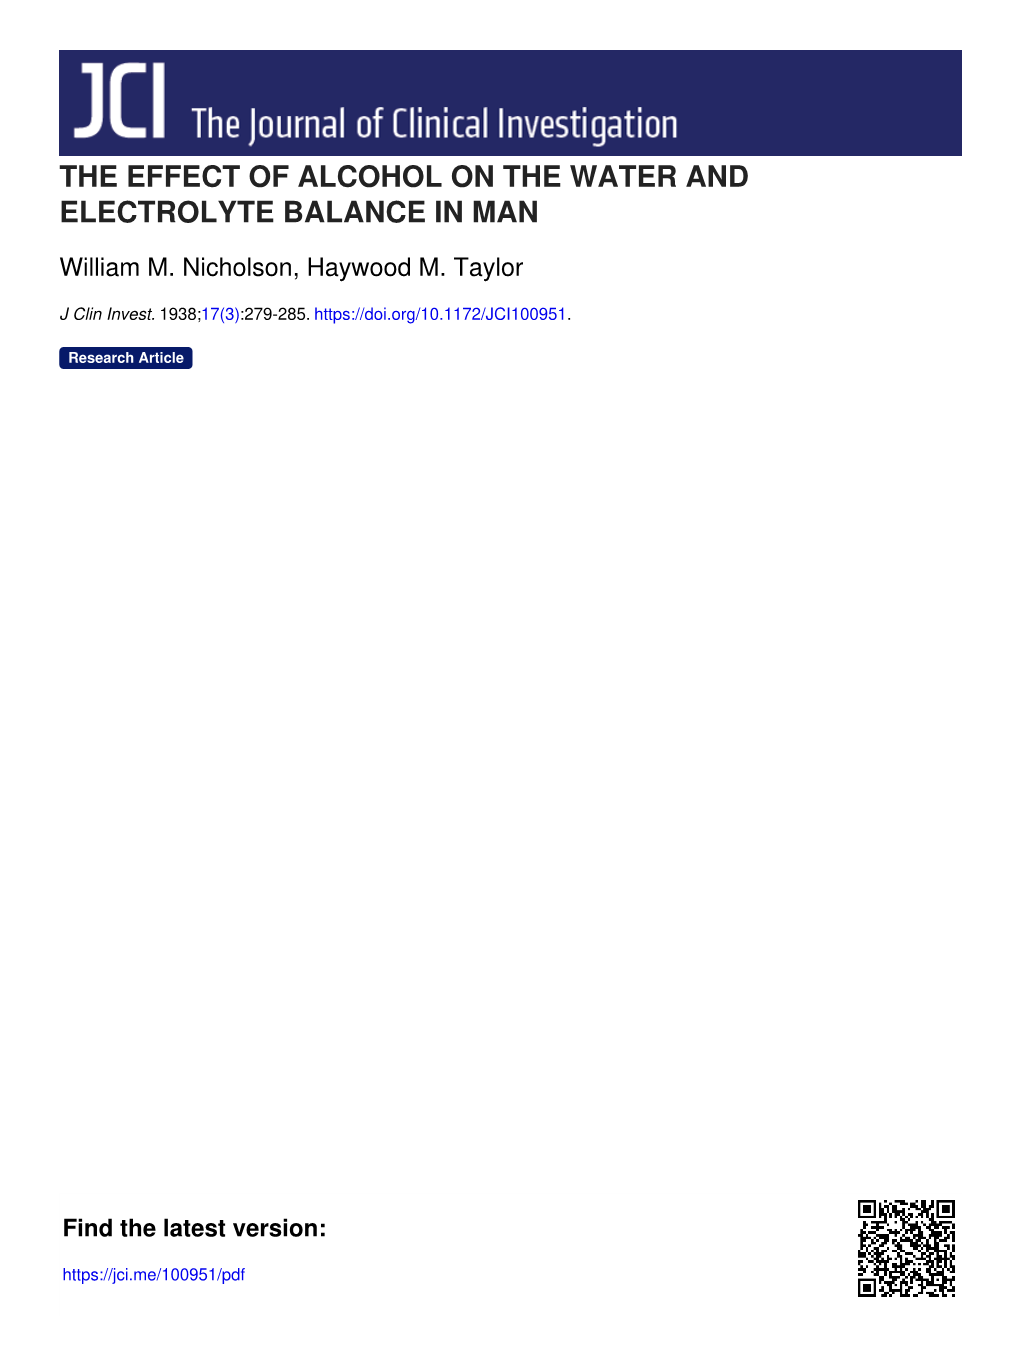 The Effect of Alcohol on the Water and Electrolyte Balance in Man